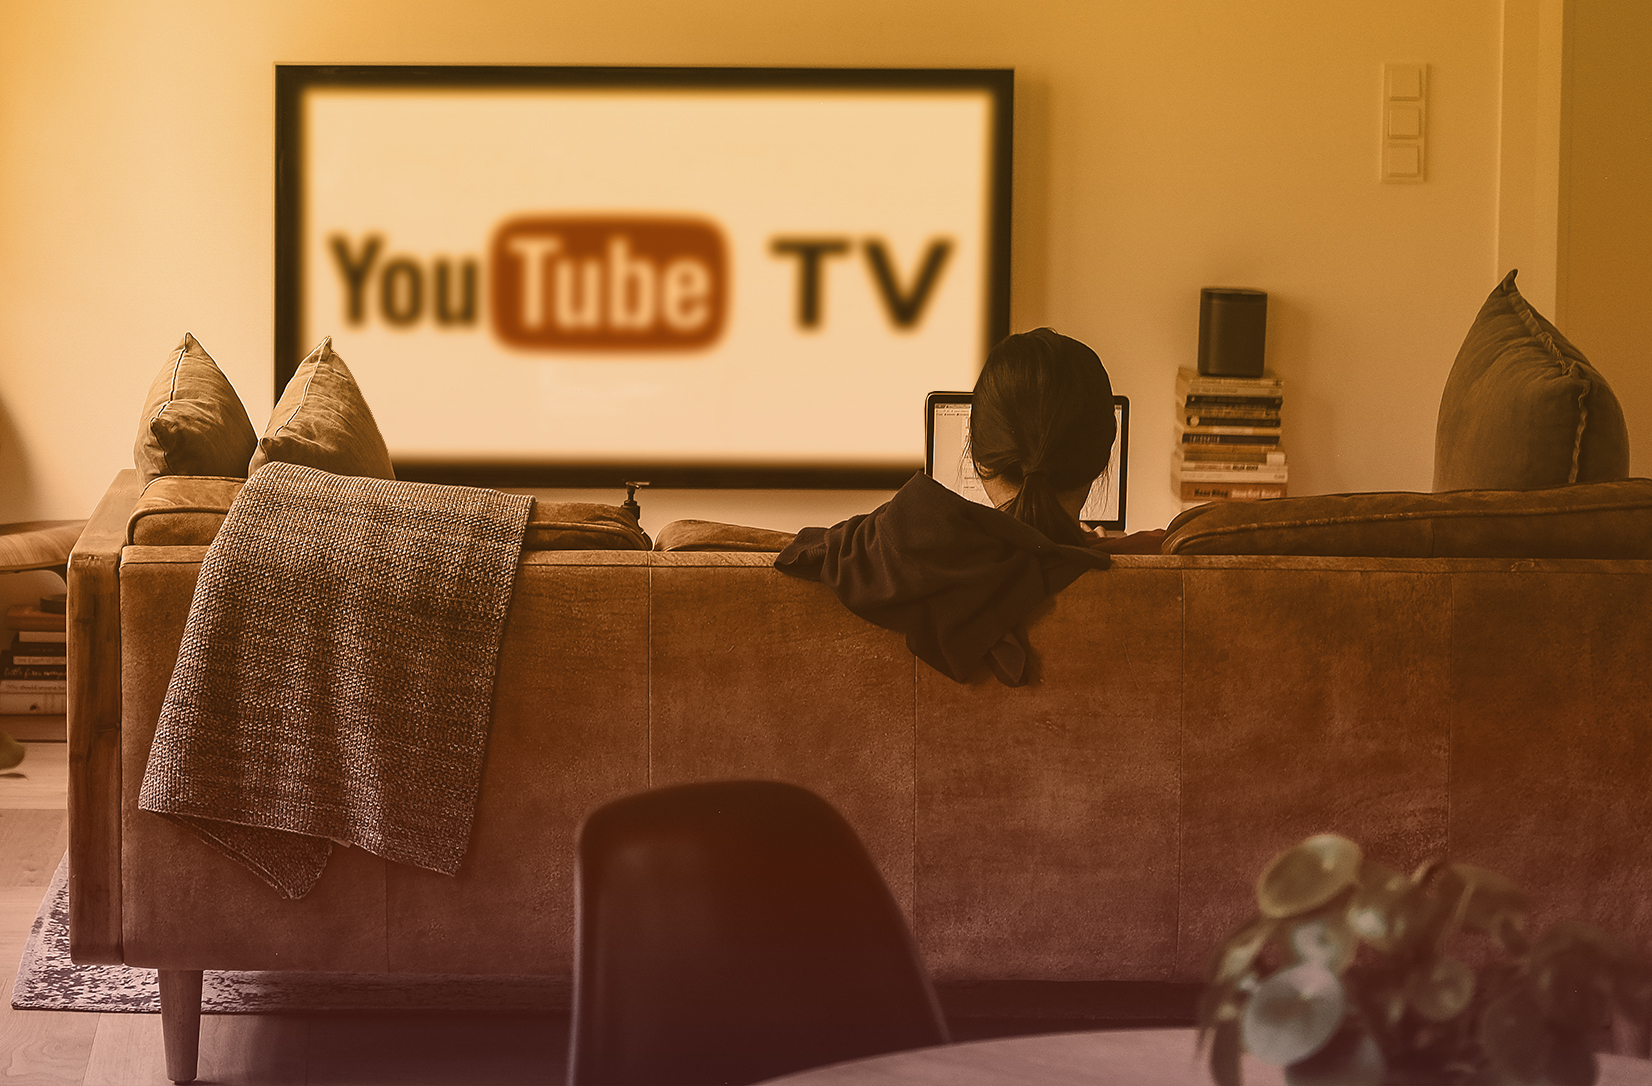 YouTubeTV Now Offers Local Channels In Mid-MO